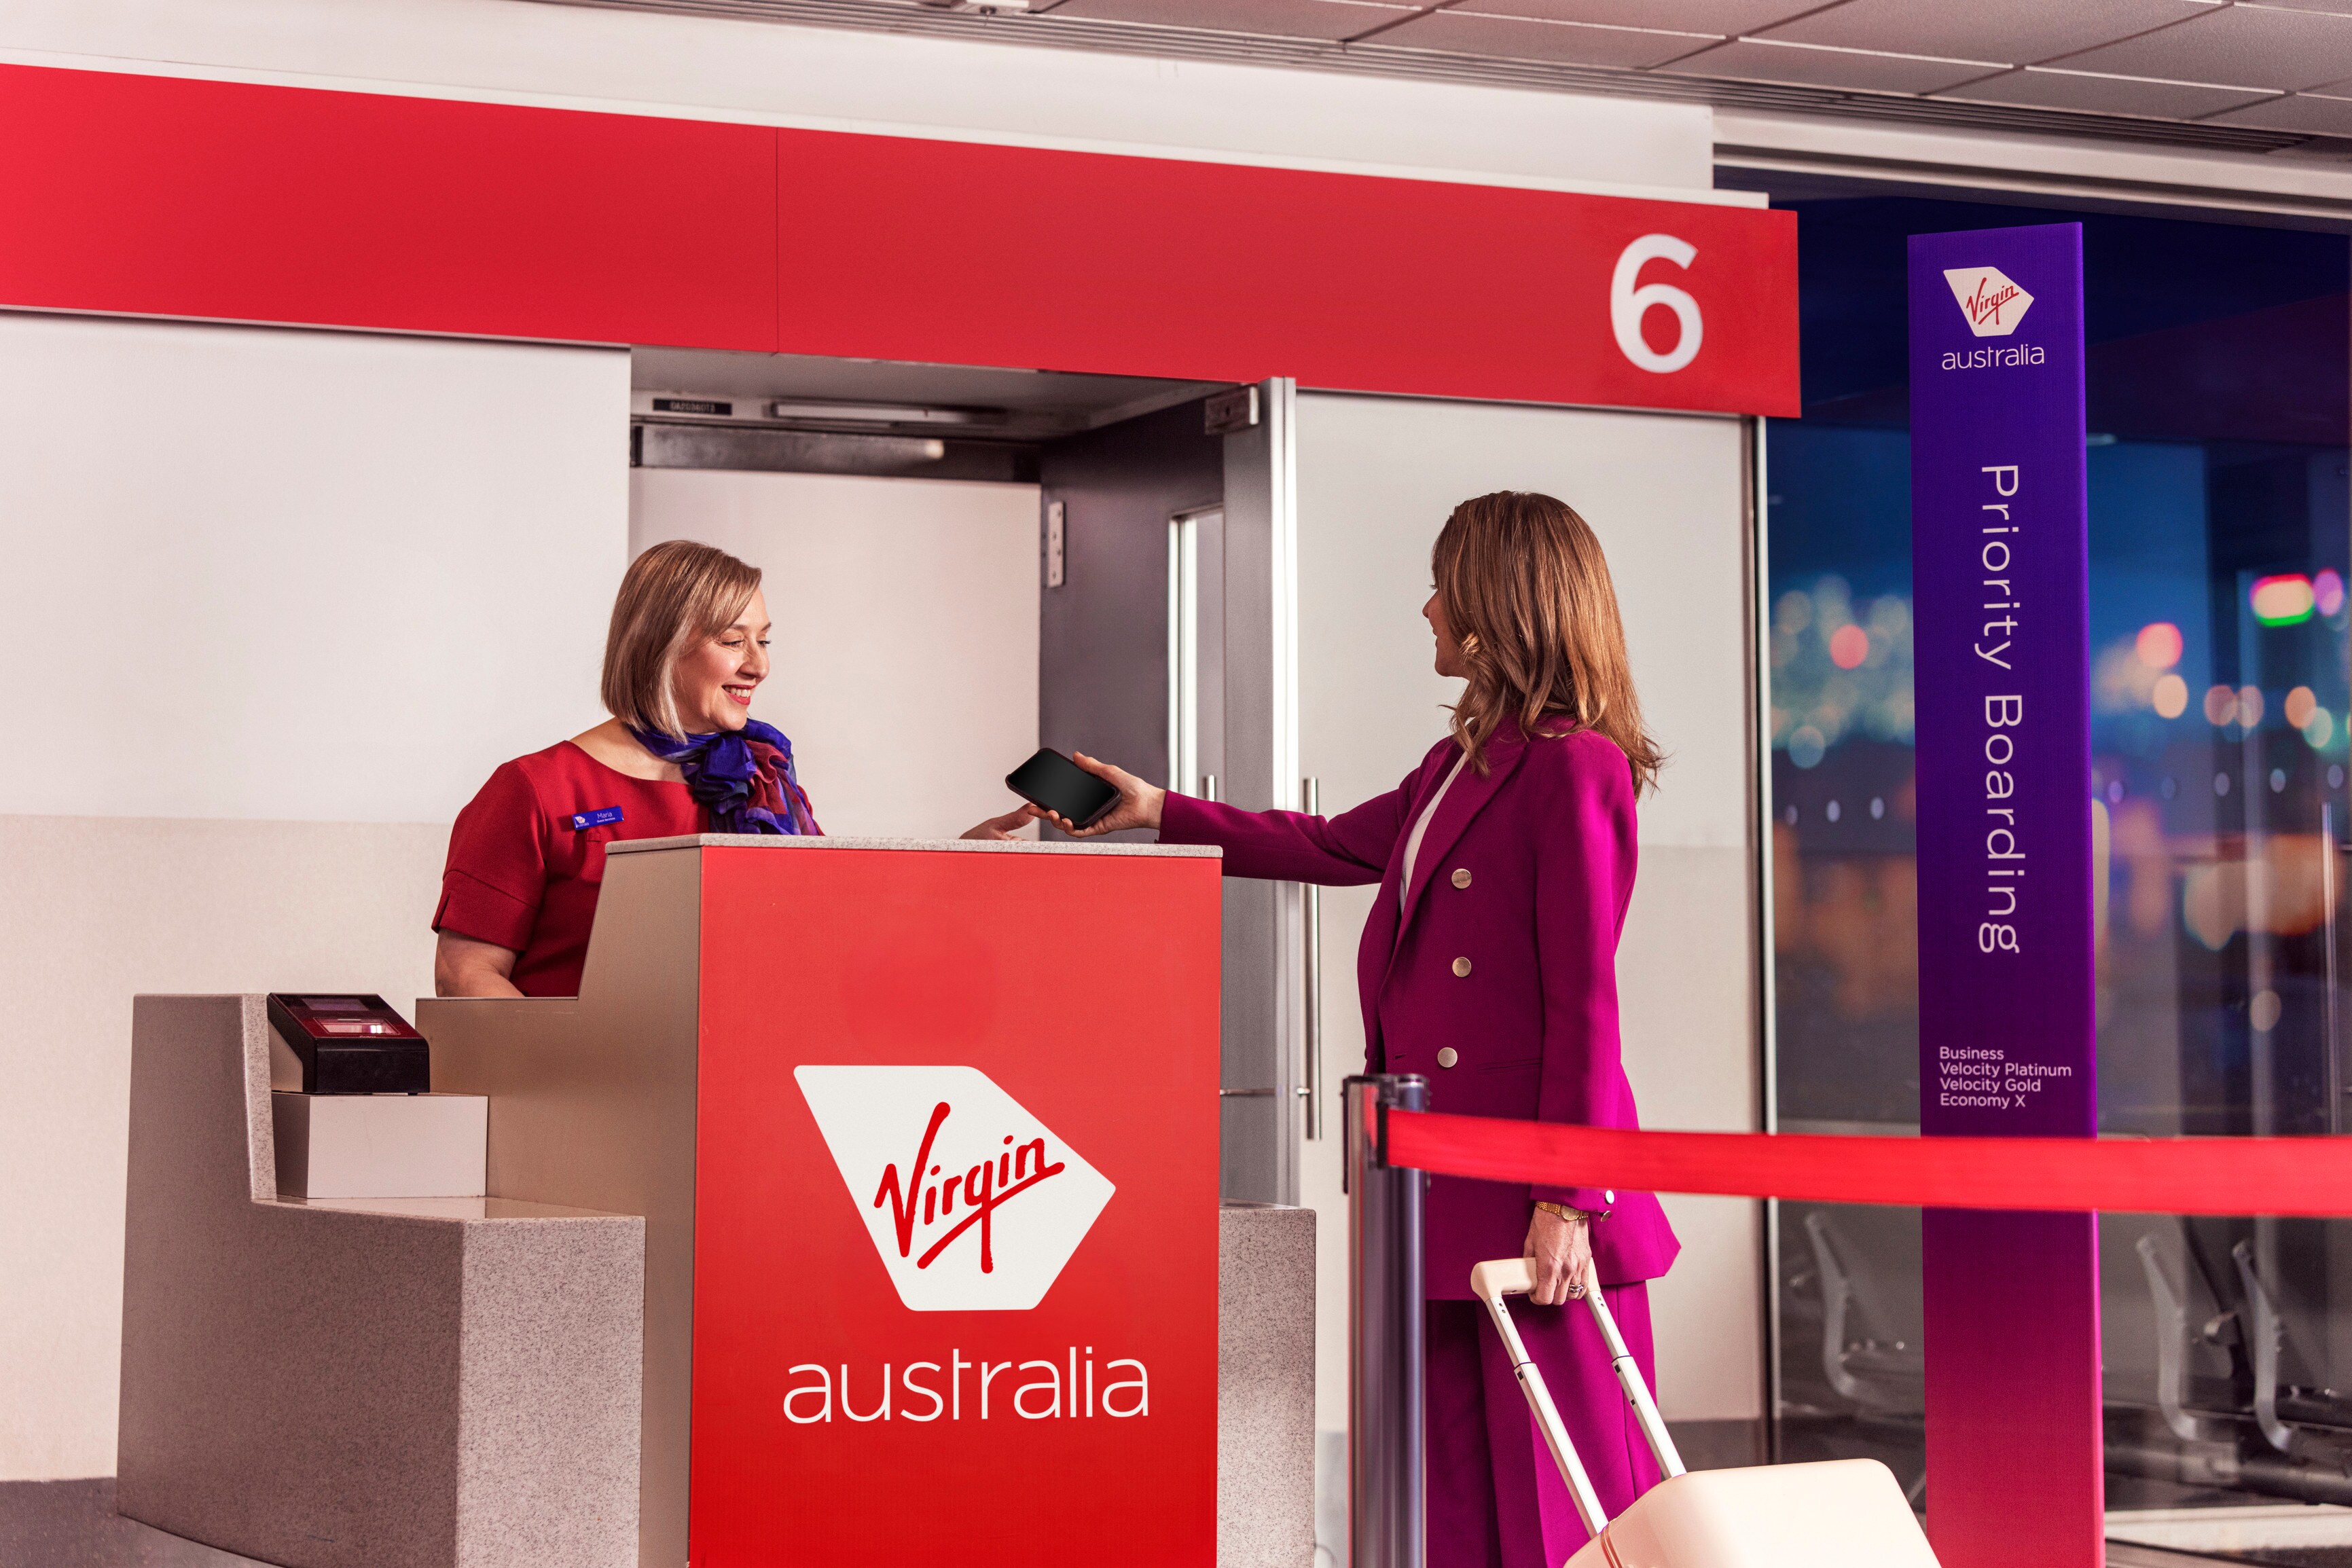 Woman traveling internationally for work handing her smartphone to a Virgin Australia worker at the priority boarding gate